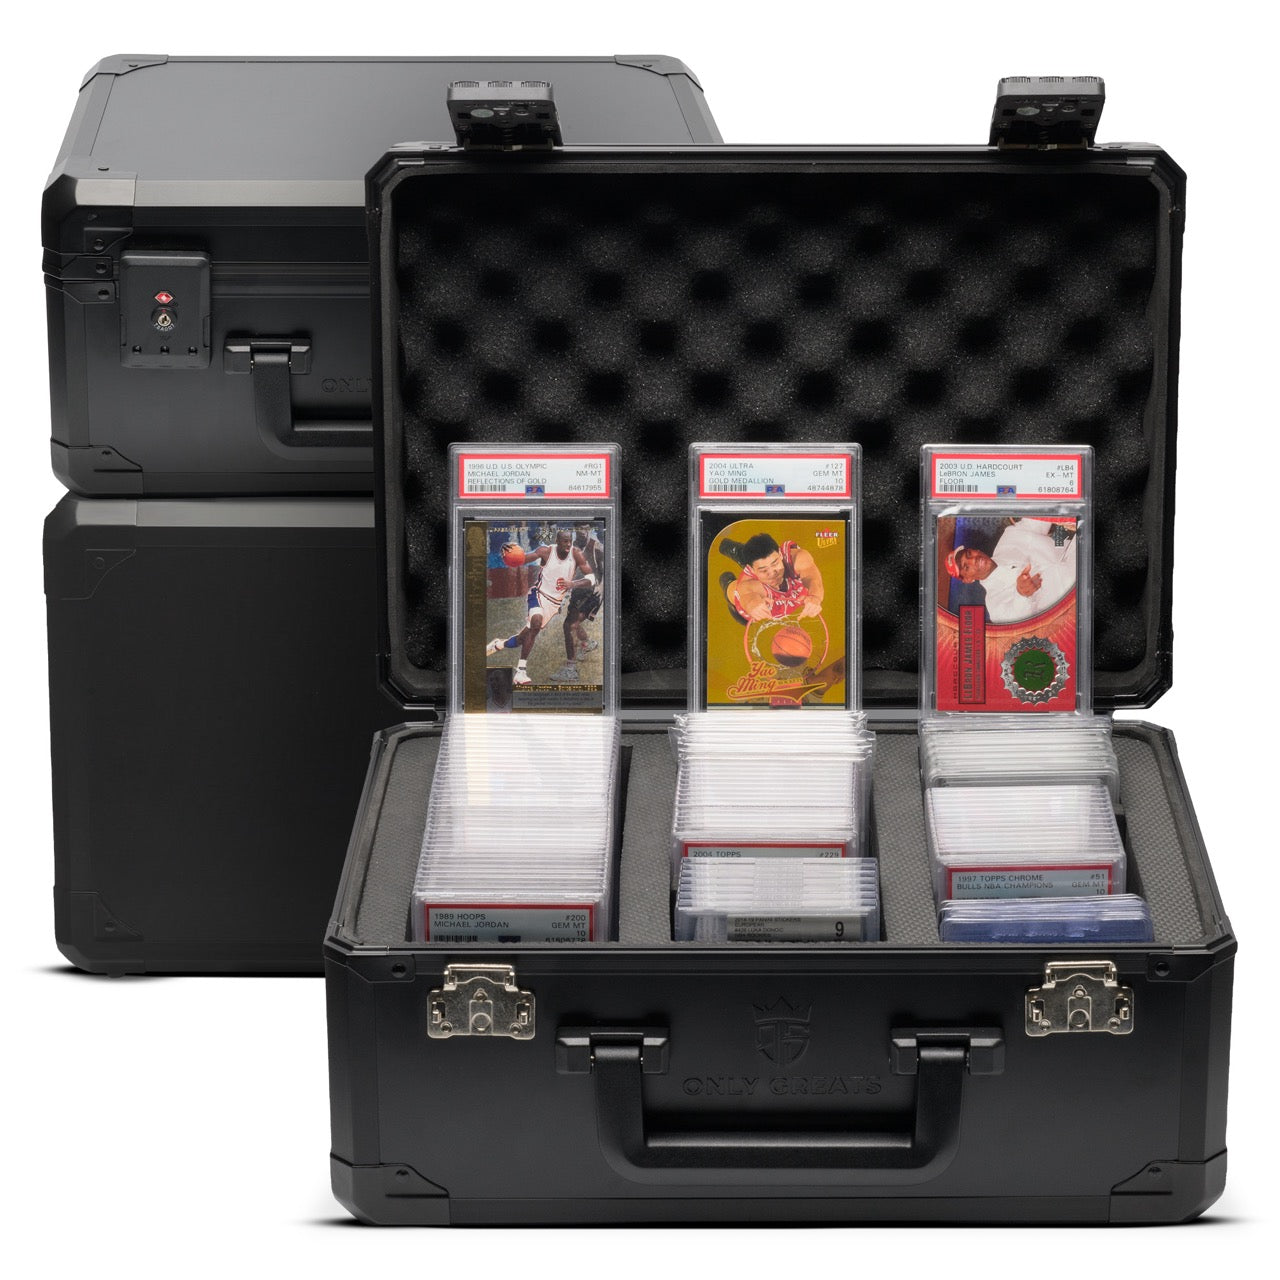 Graded Card Storage Case - 3-rows fits PSA, BGS, SGC, CGC - open case with 3 PSA slabs showing (Michael Jordan, Yao Ming, LeBron James). $20 Free Grading Credit Promotion * Terms apply.